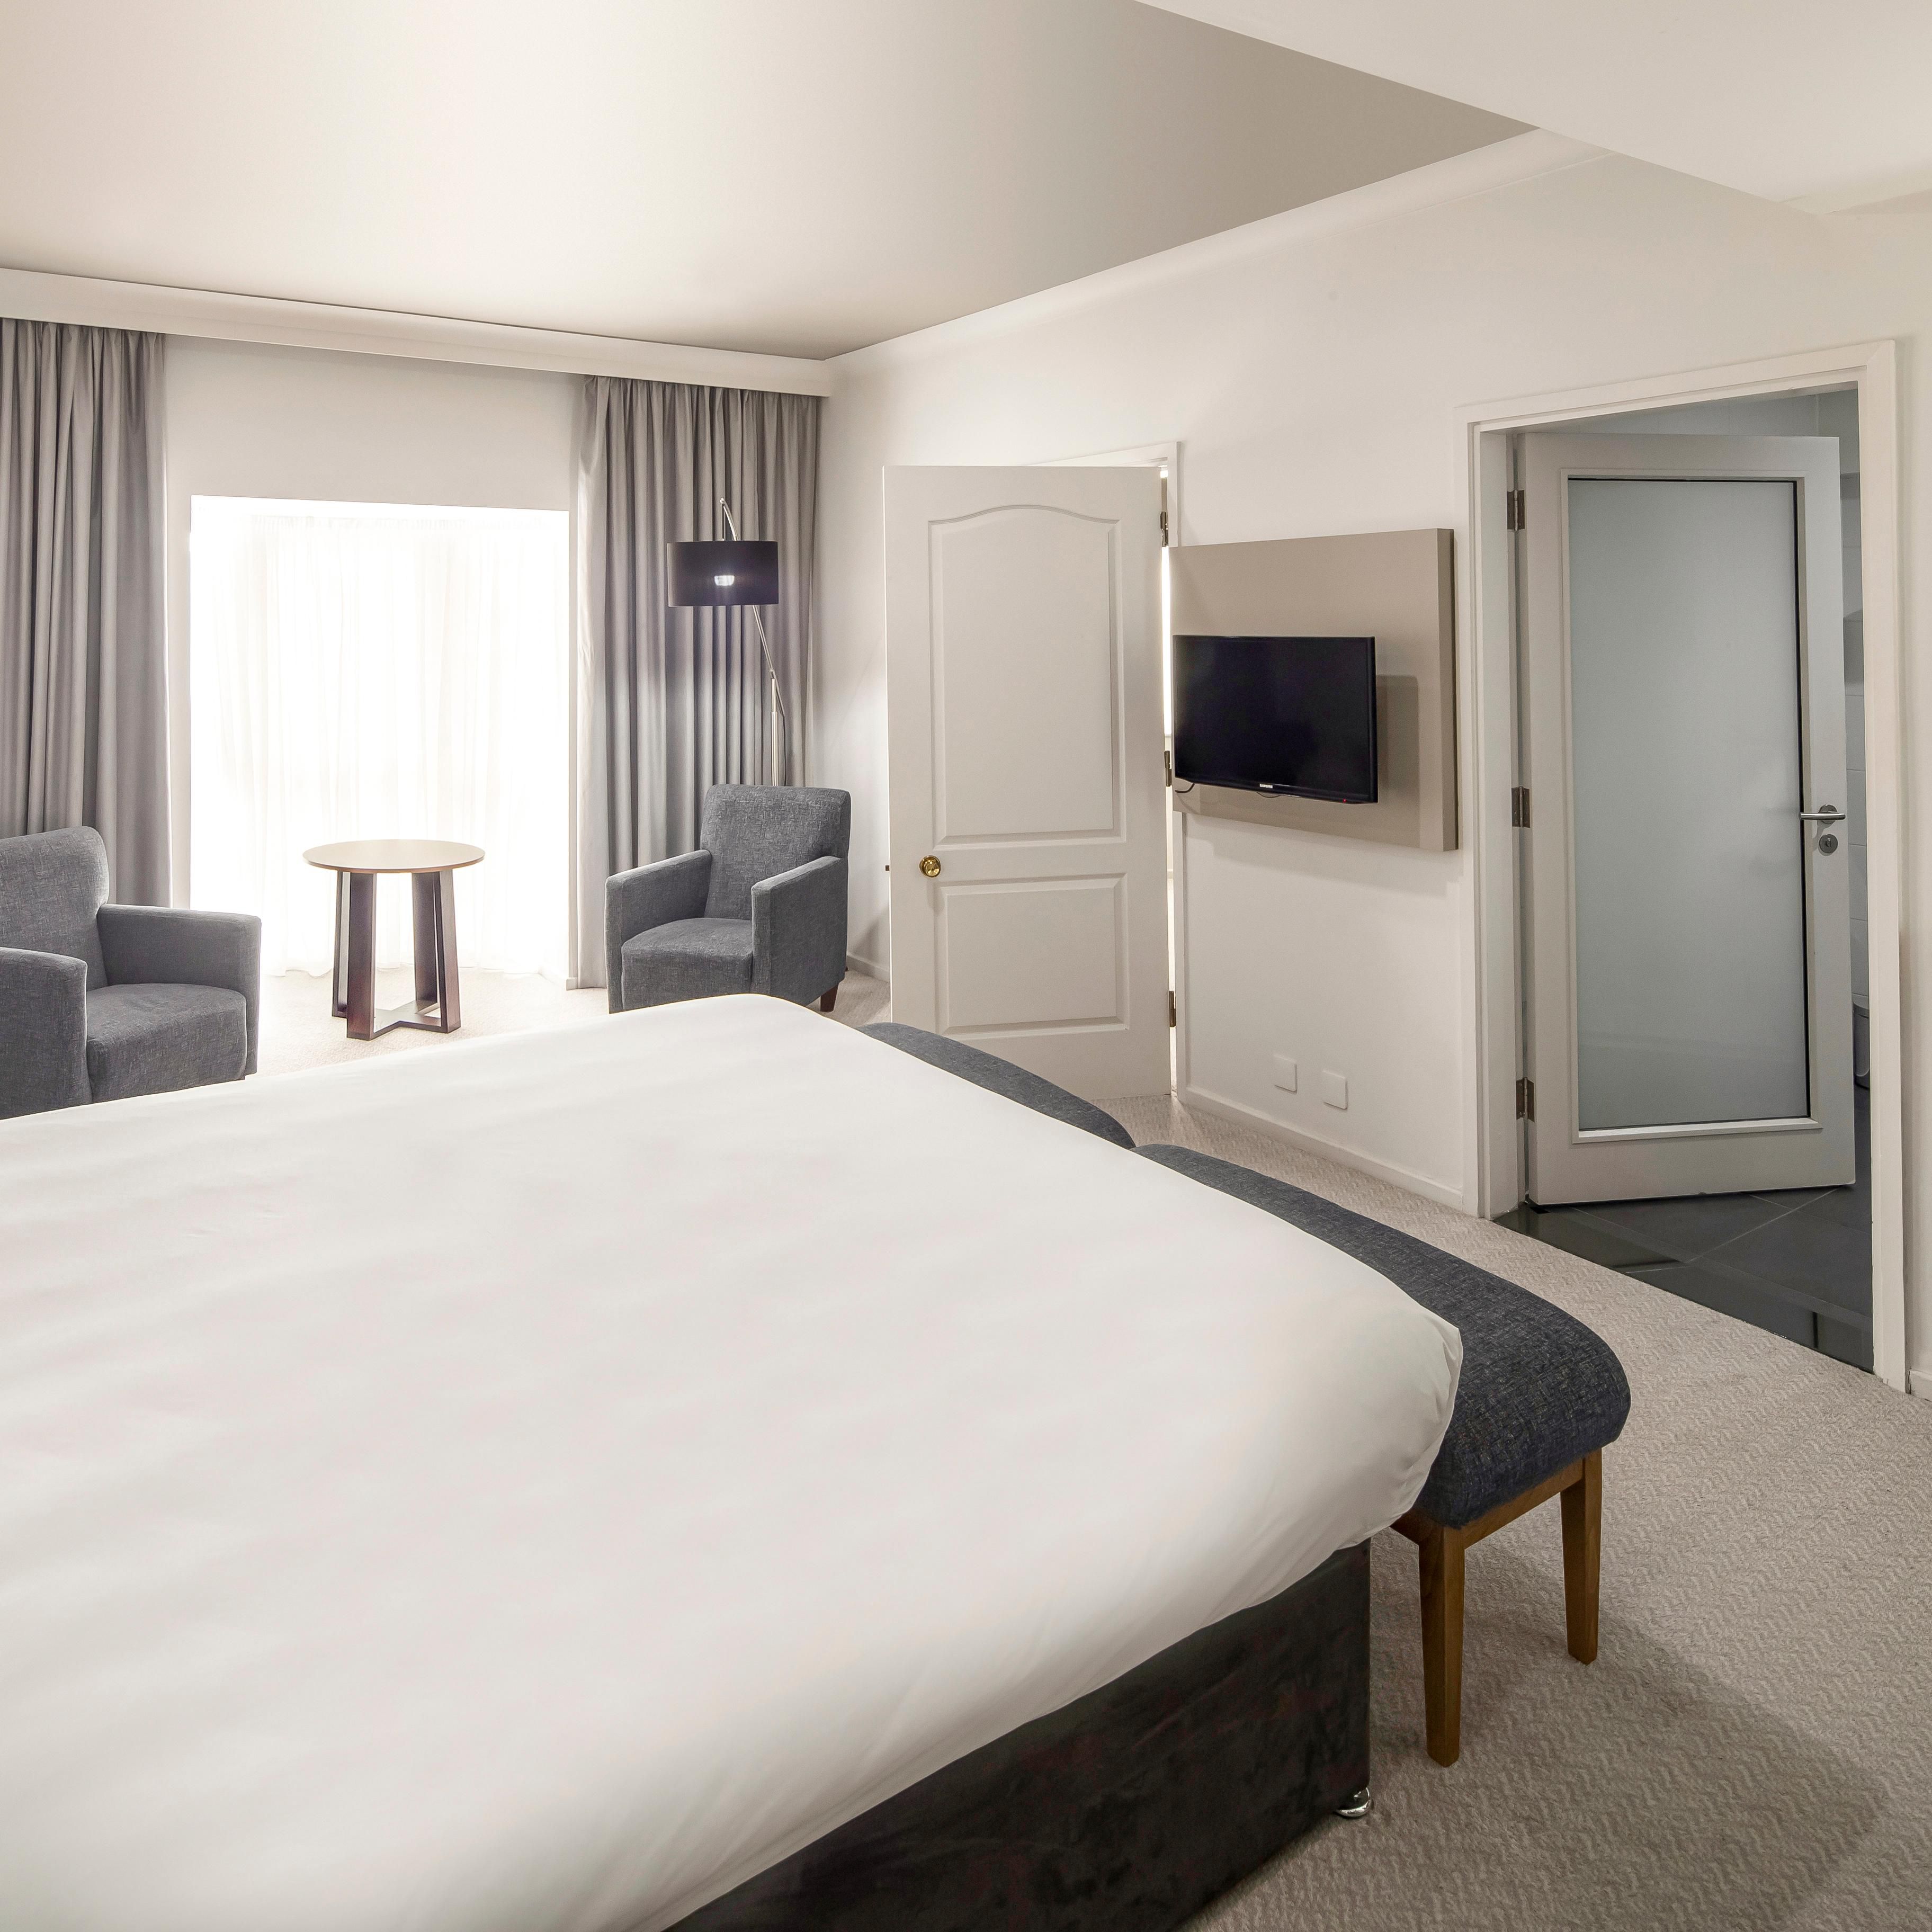 Enjoy your stay in our spacious King Executive suite.